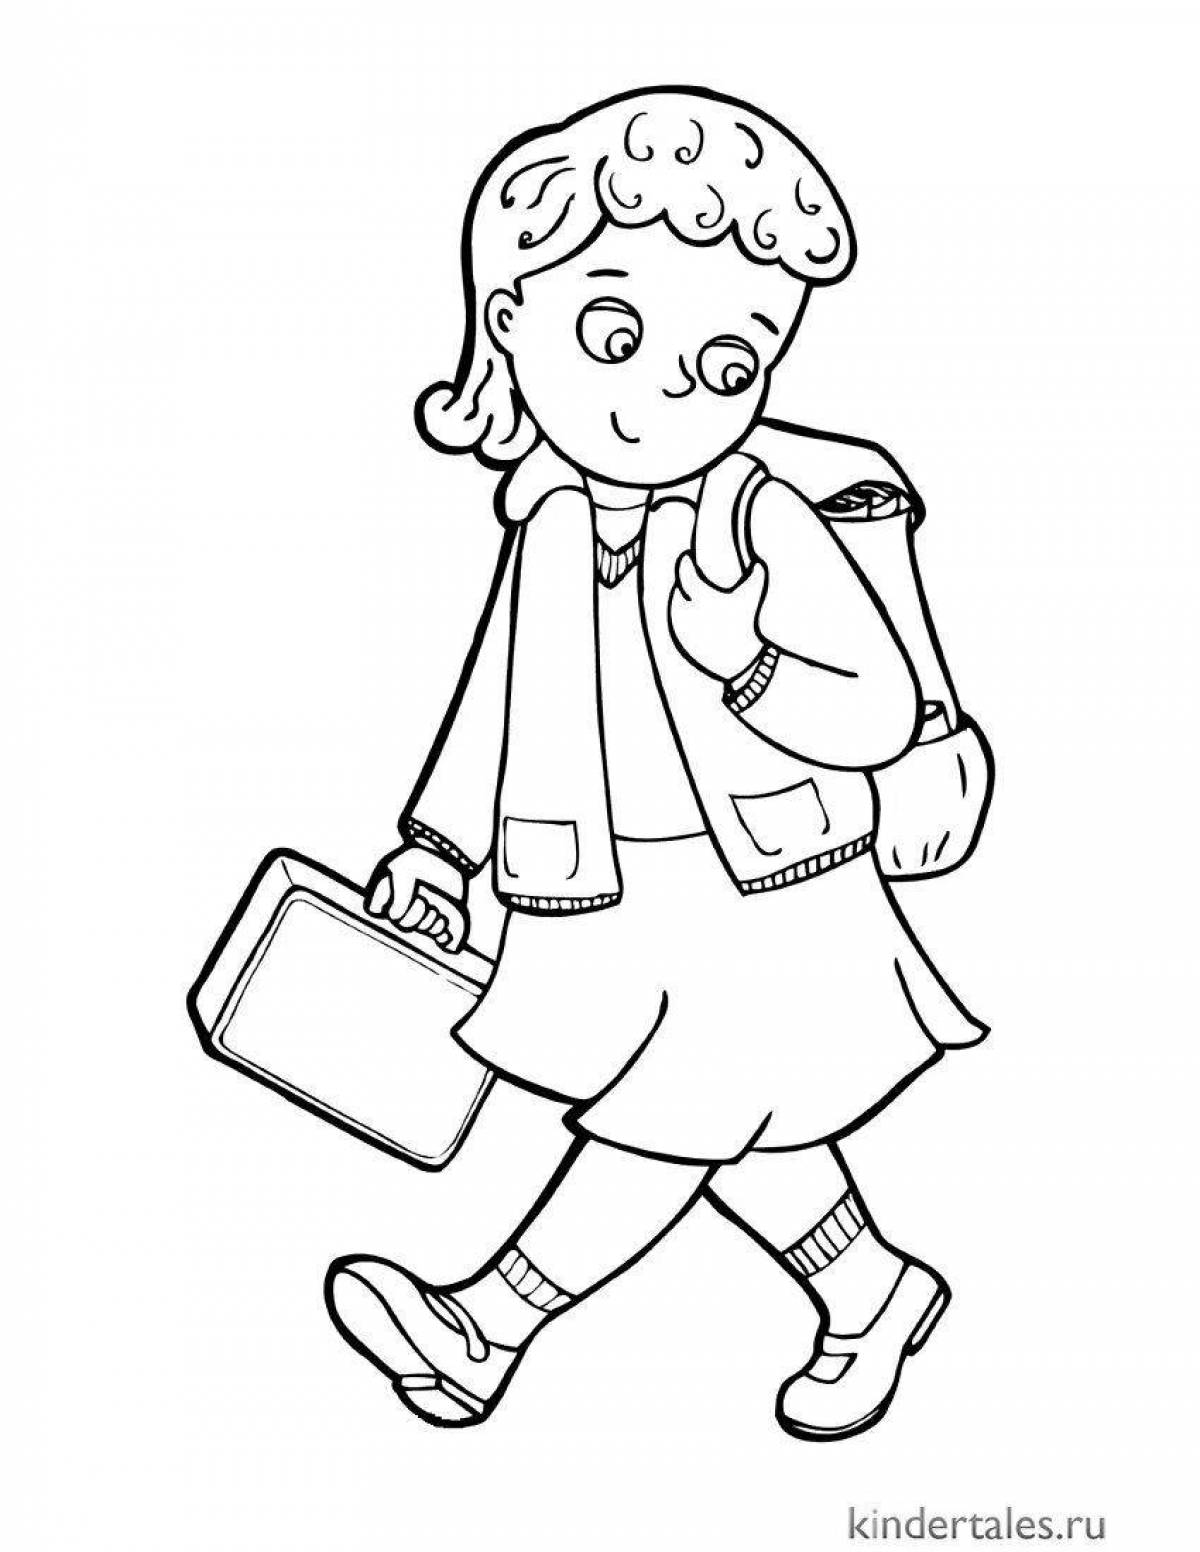 Coloring page playful schoolgirl